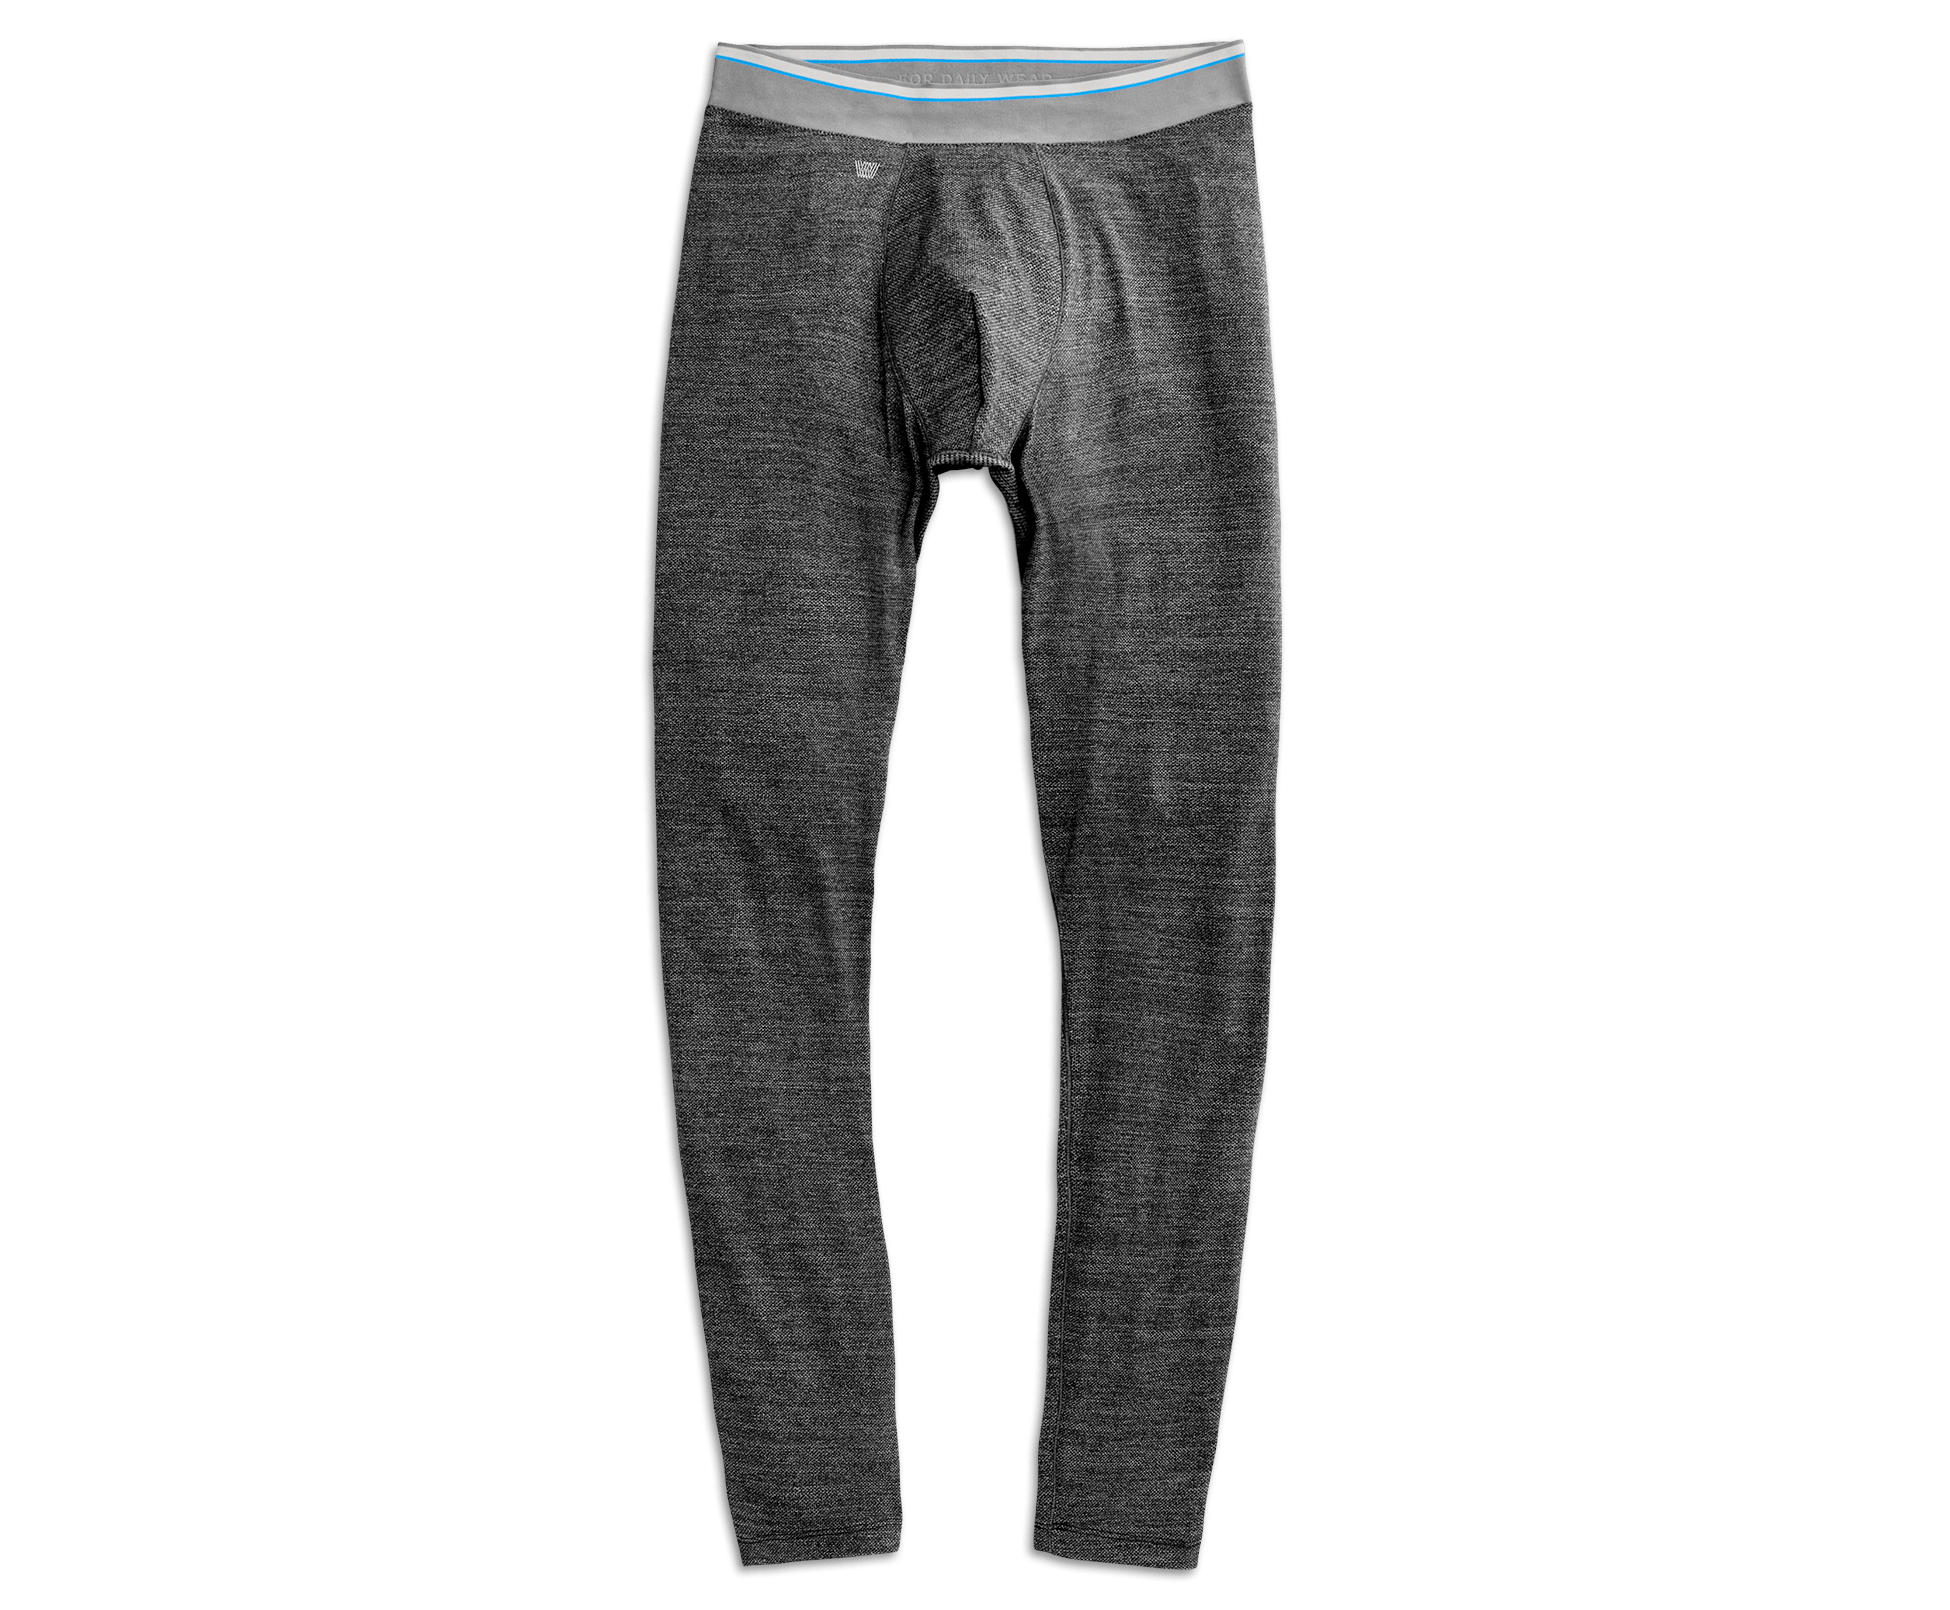 LJ&S Long Thermal Underwear in Grey Mix - Bottoms for Tall Men